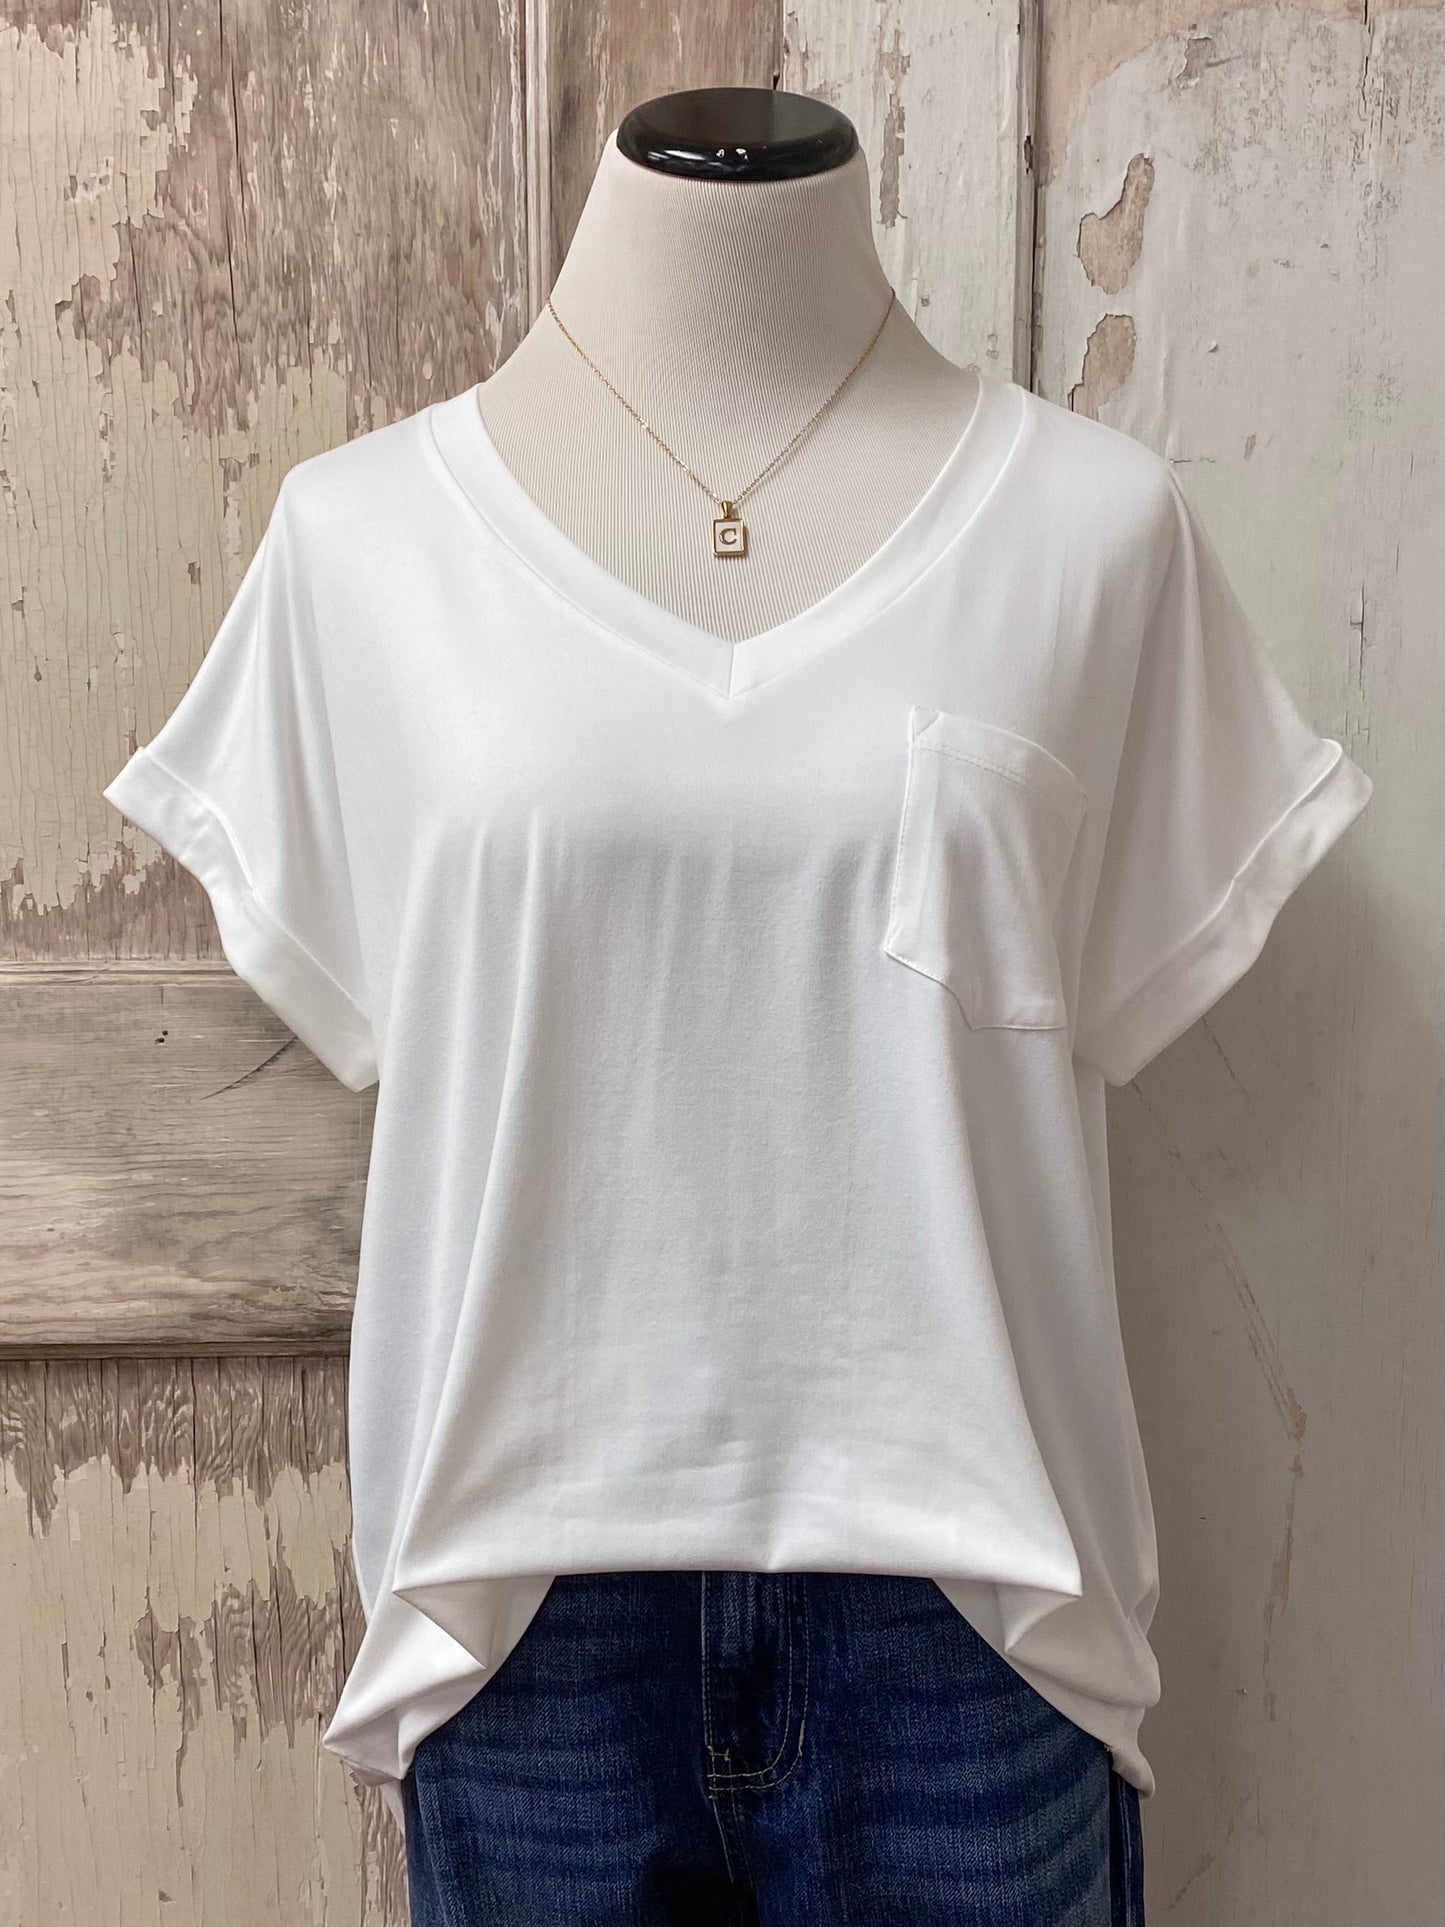 Mulberry Top